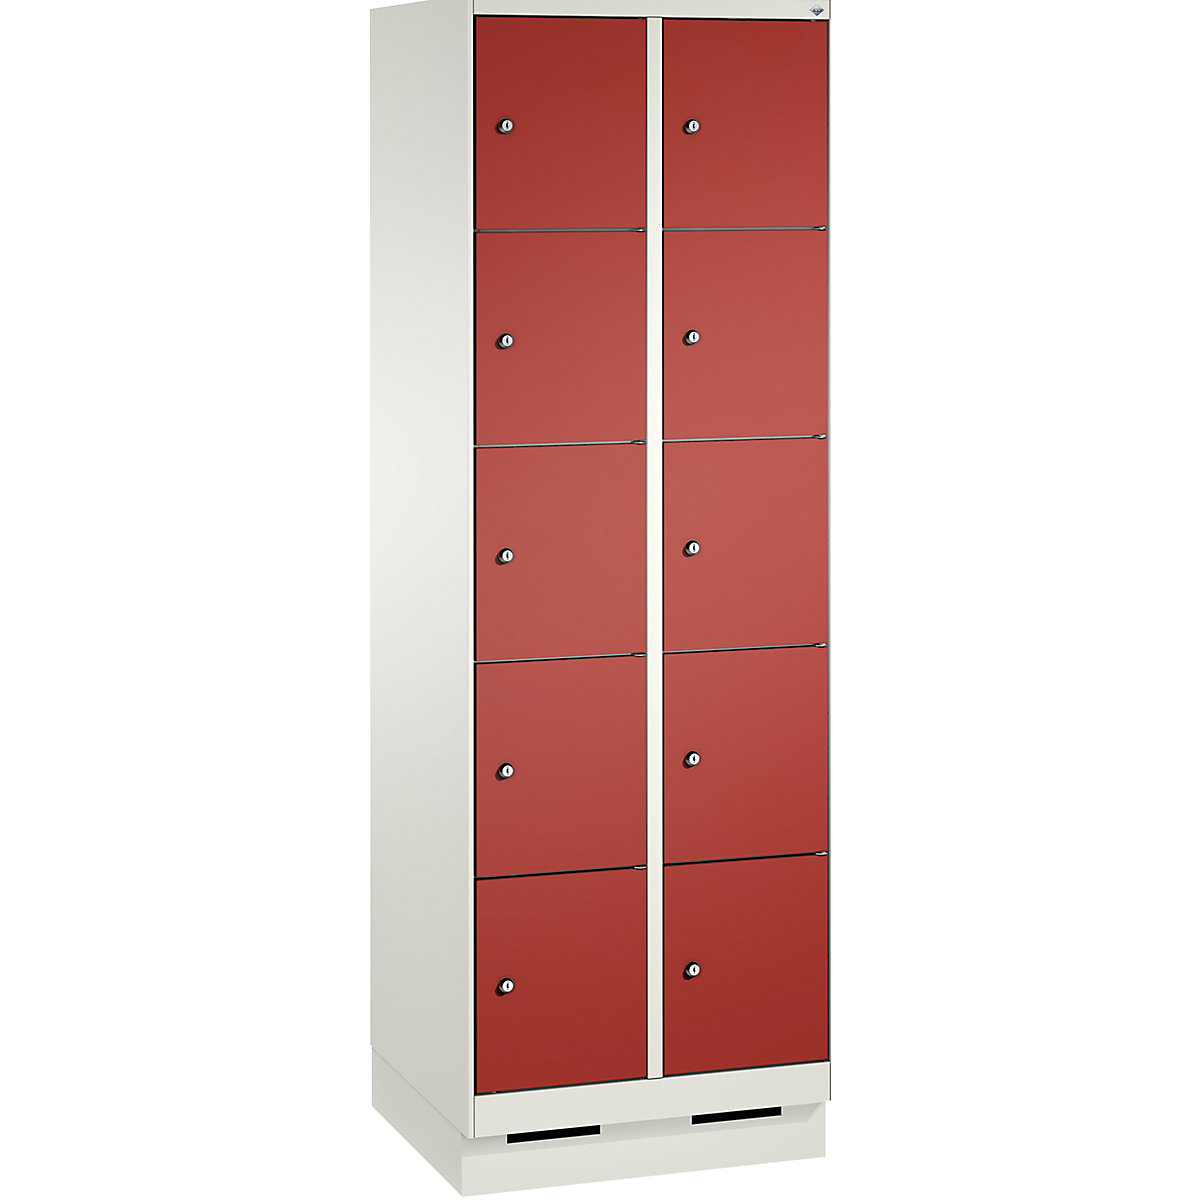 EVOLO locker unit, with plinth – C+P, 2 compartments, 5 shelf compartments each, compartment width 300 mm, traffic white / flame red-1